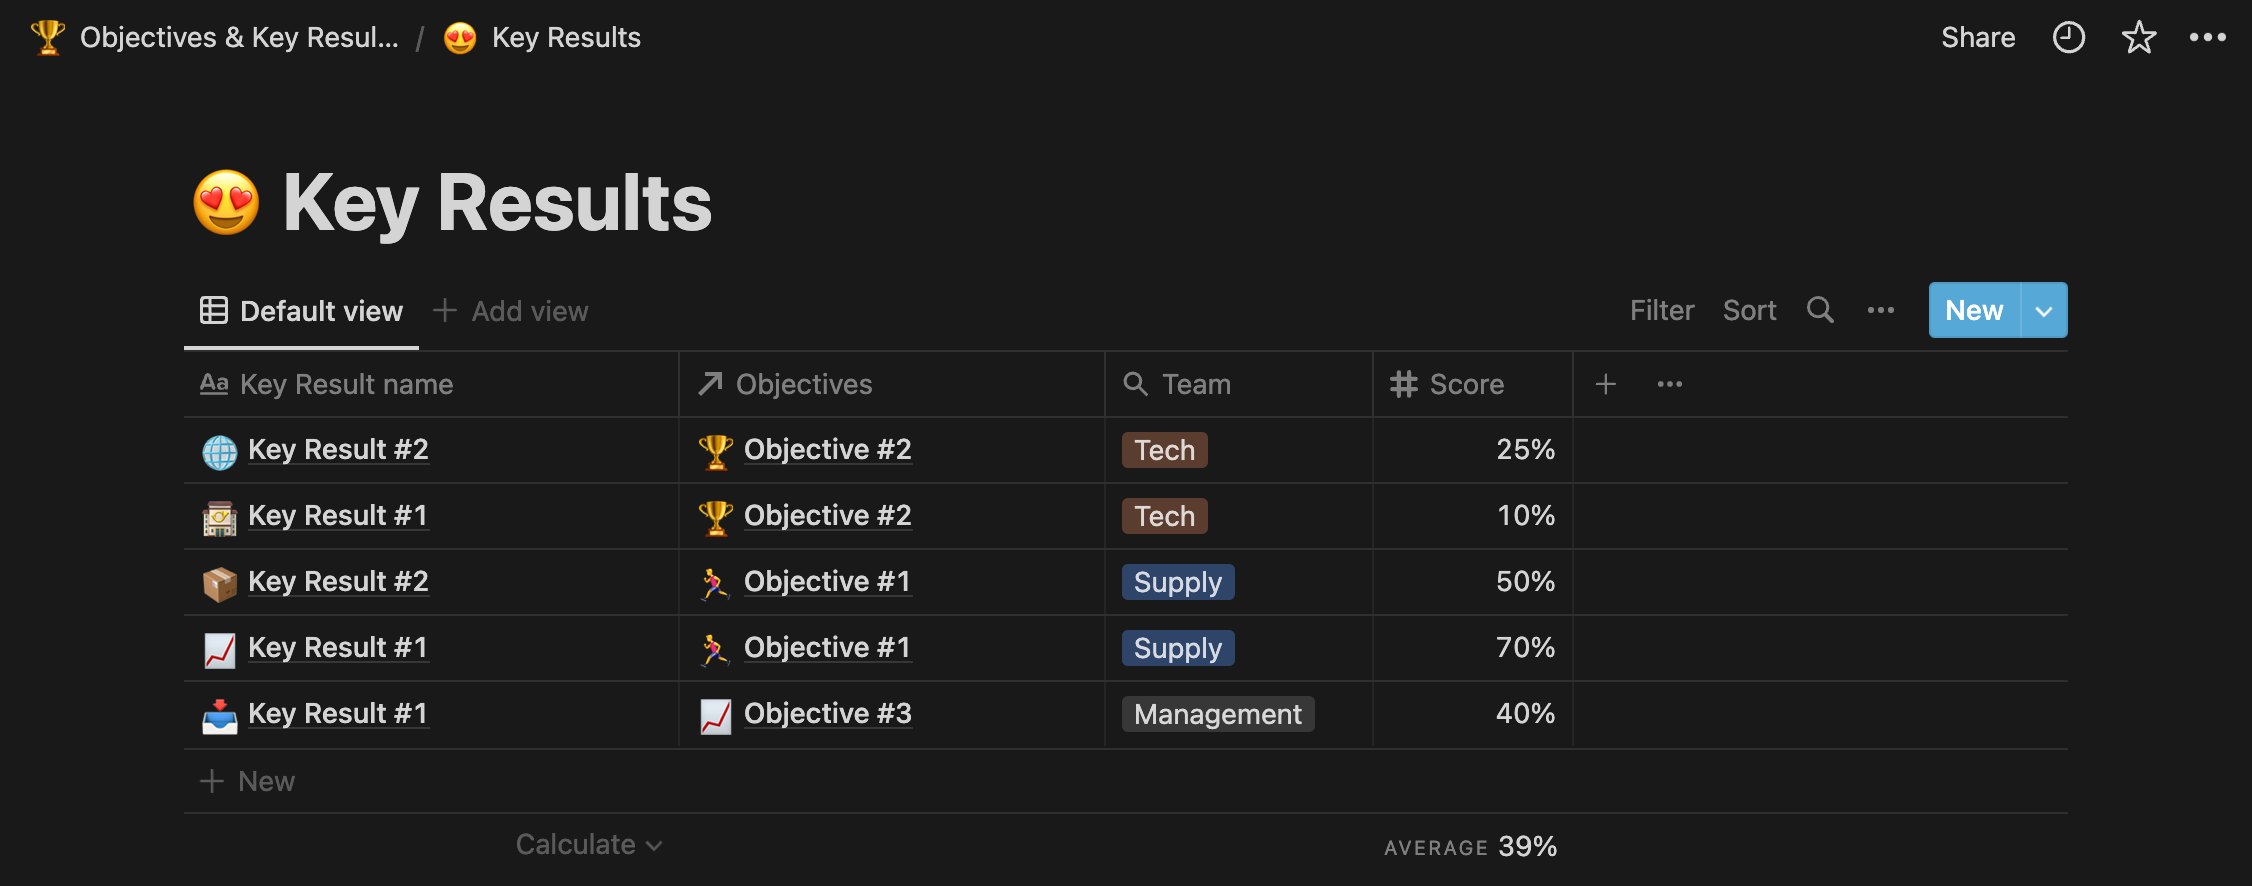 image of key results in Notion OKR Template